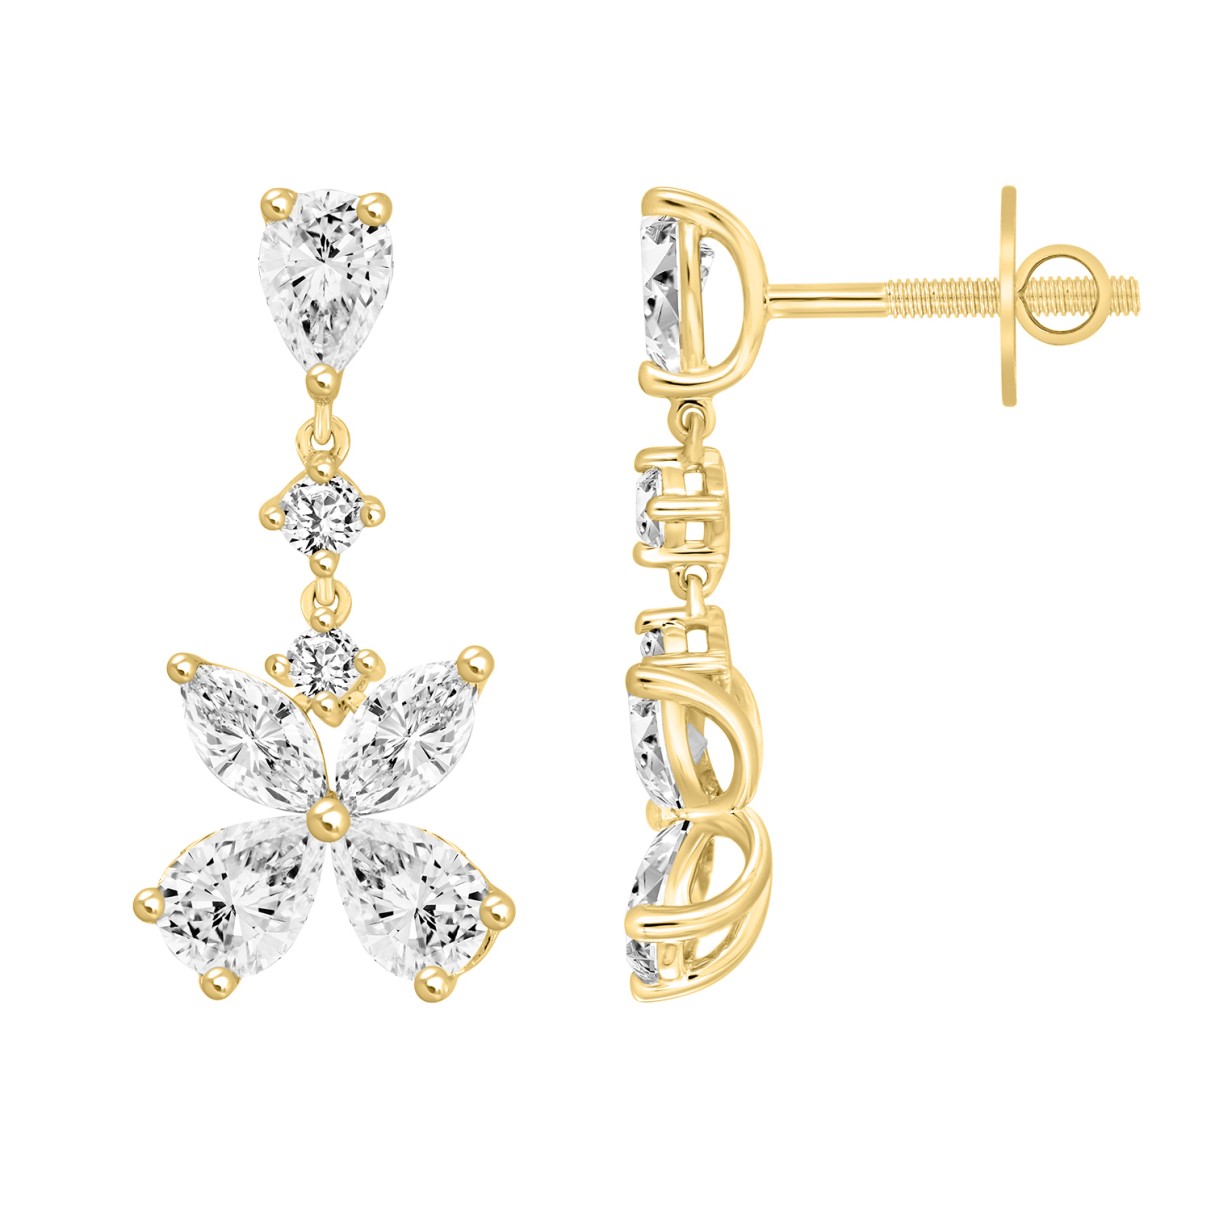 LADIES EARRINGS 3CT ROUND/MARQUISE/PEAR DIAMOND 14K YELLOW GOLD